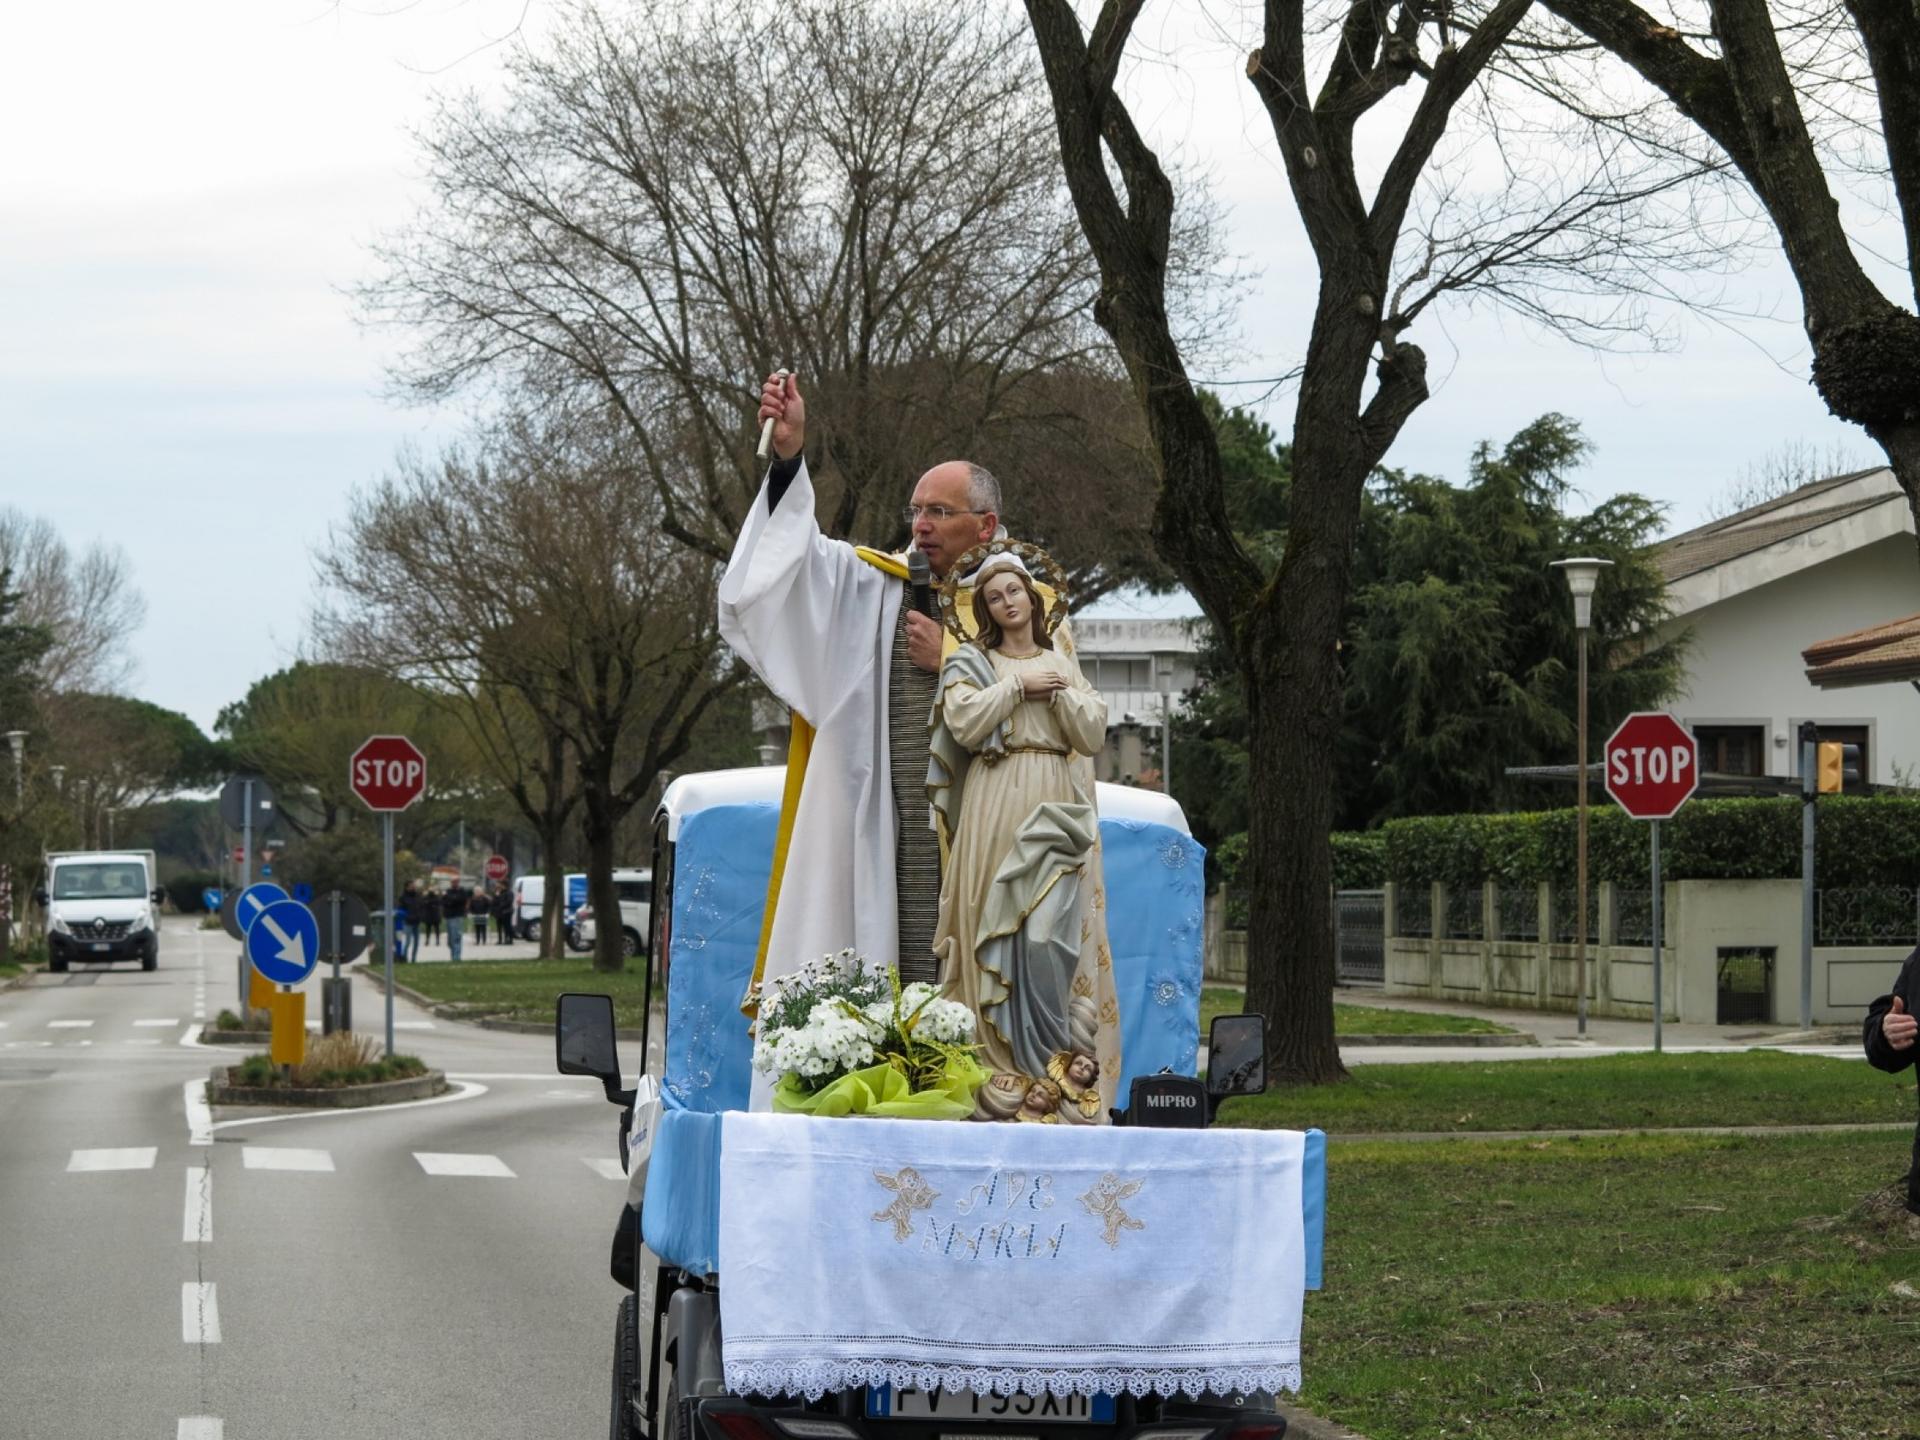 Rev. Andrea Vena, the priest of Bibiano, a small town on the coast near Venice, loaded a statue of the madonna on a three-wheeled car and set off along the streets of his town one March morning.